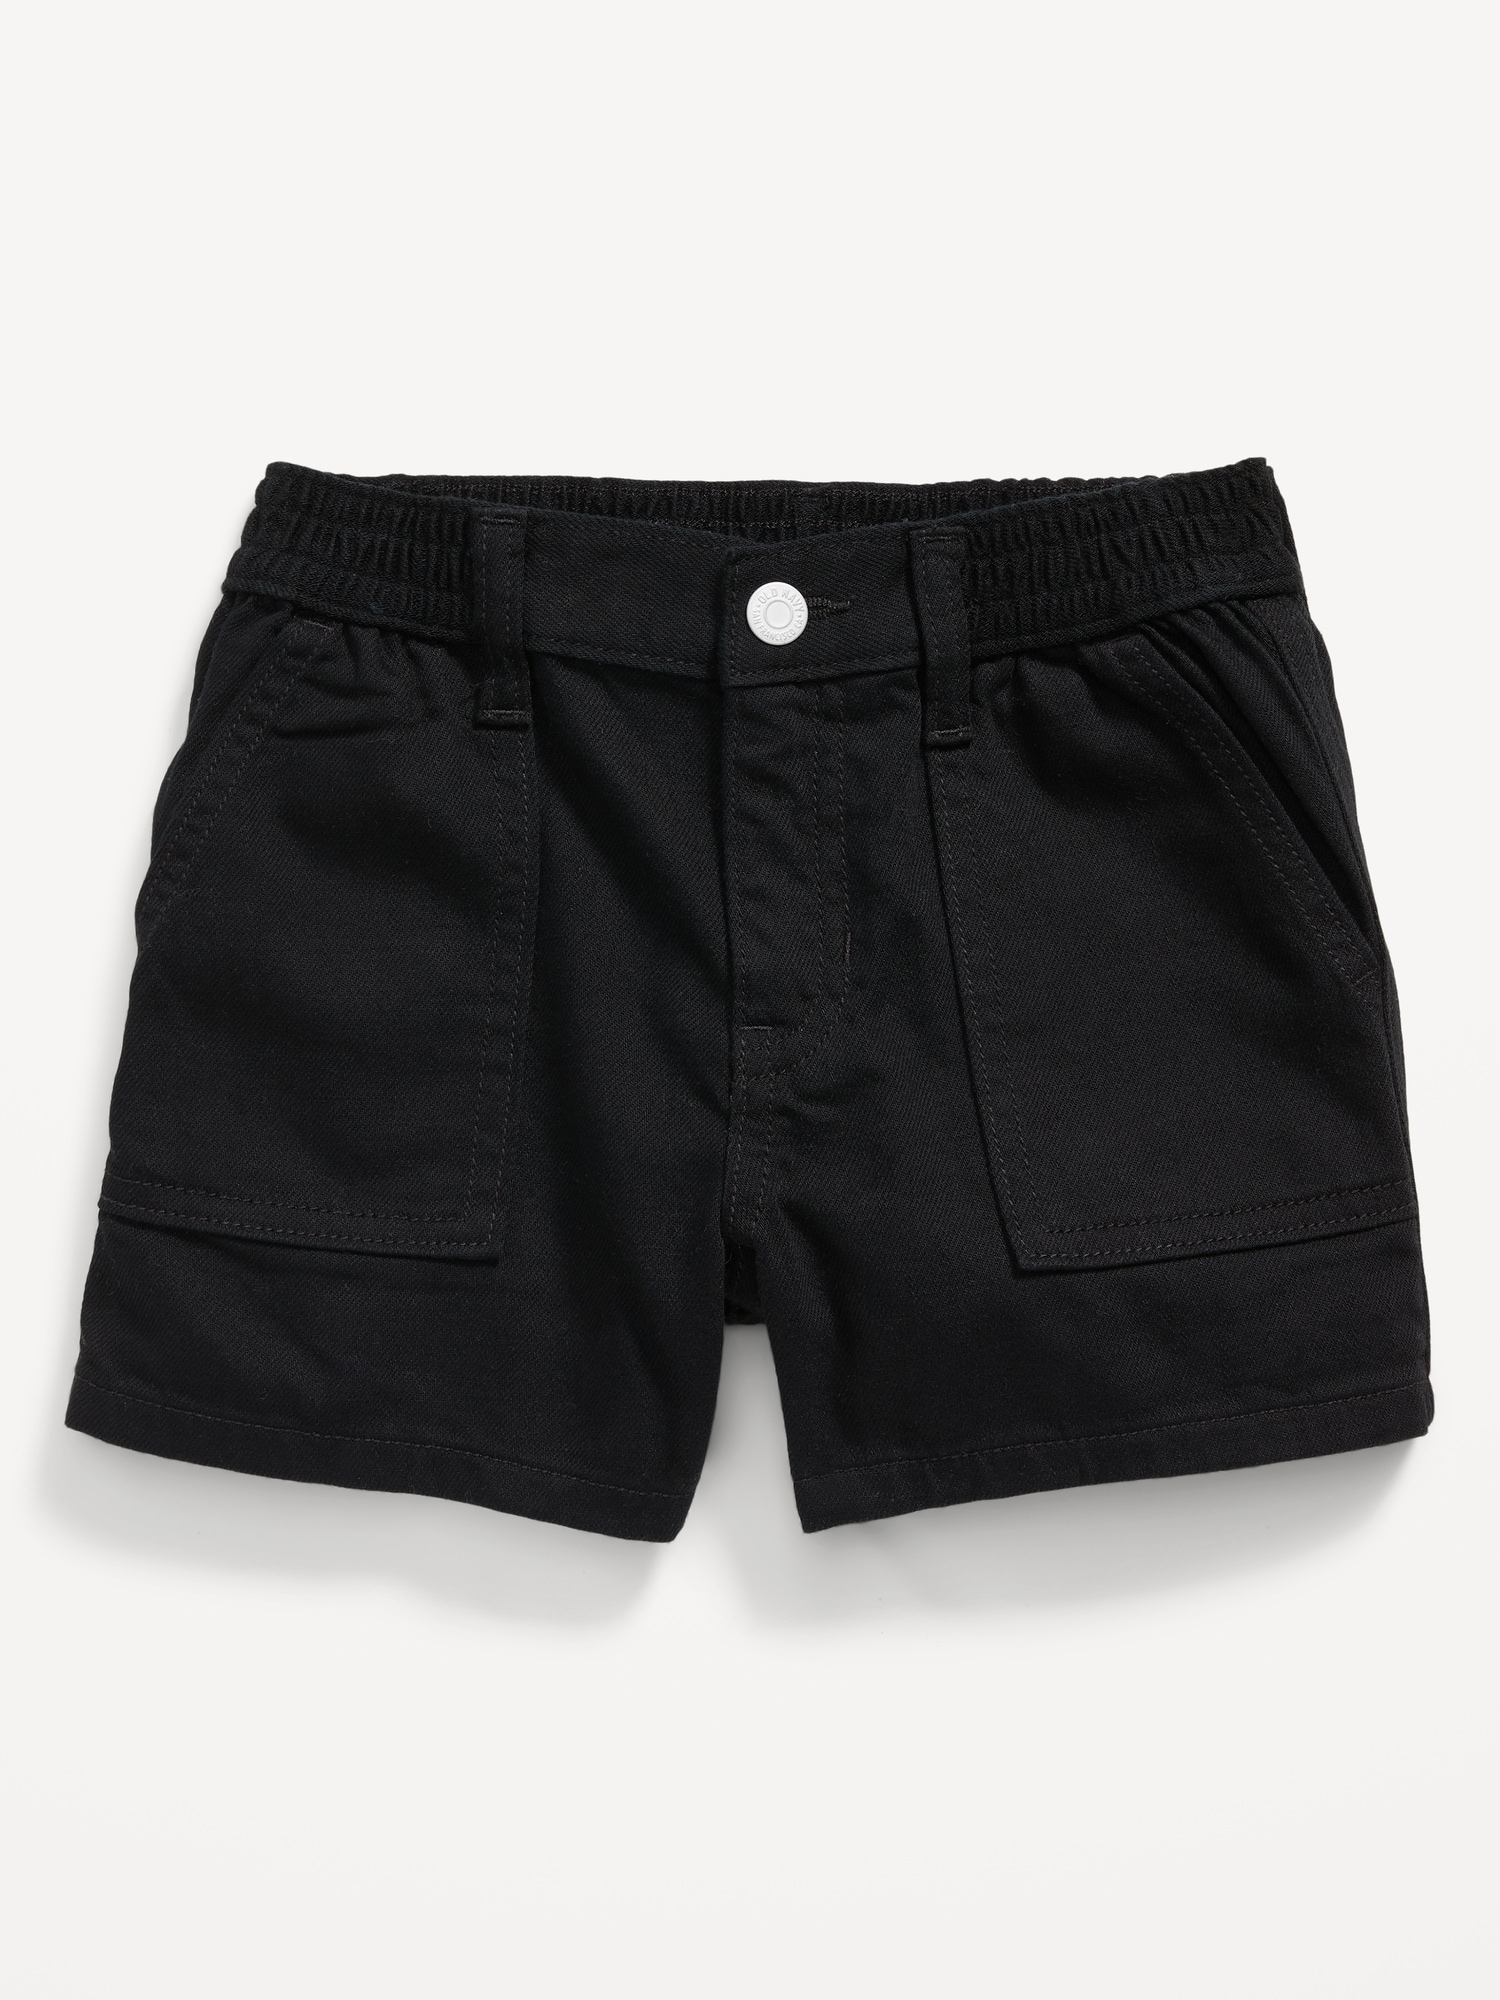 Elasticized High-Waisted Utility Jean Shorts for Girls